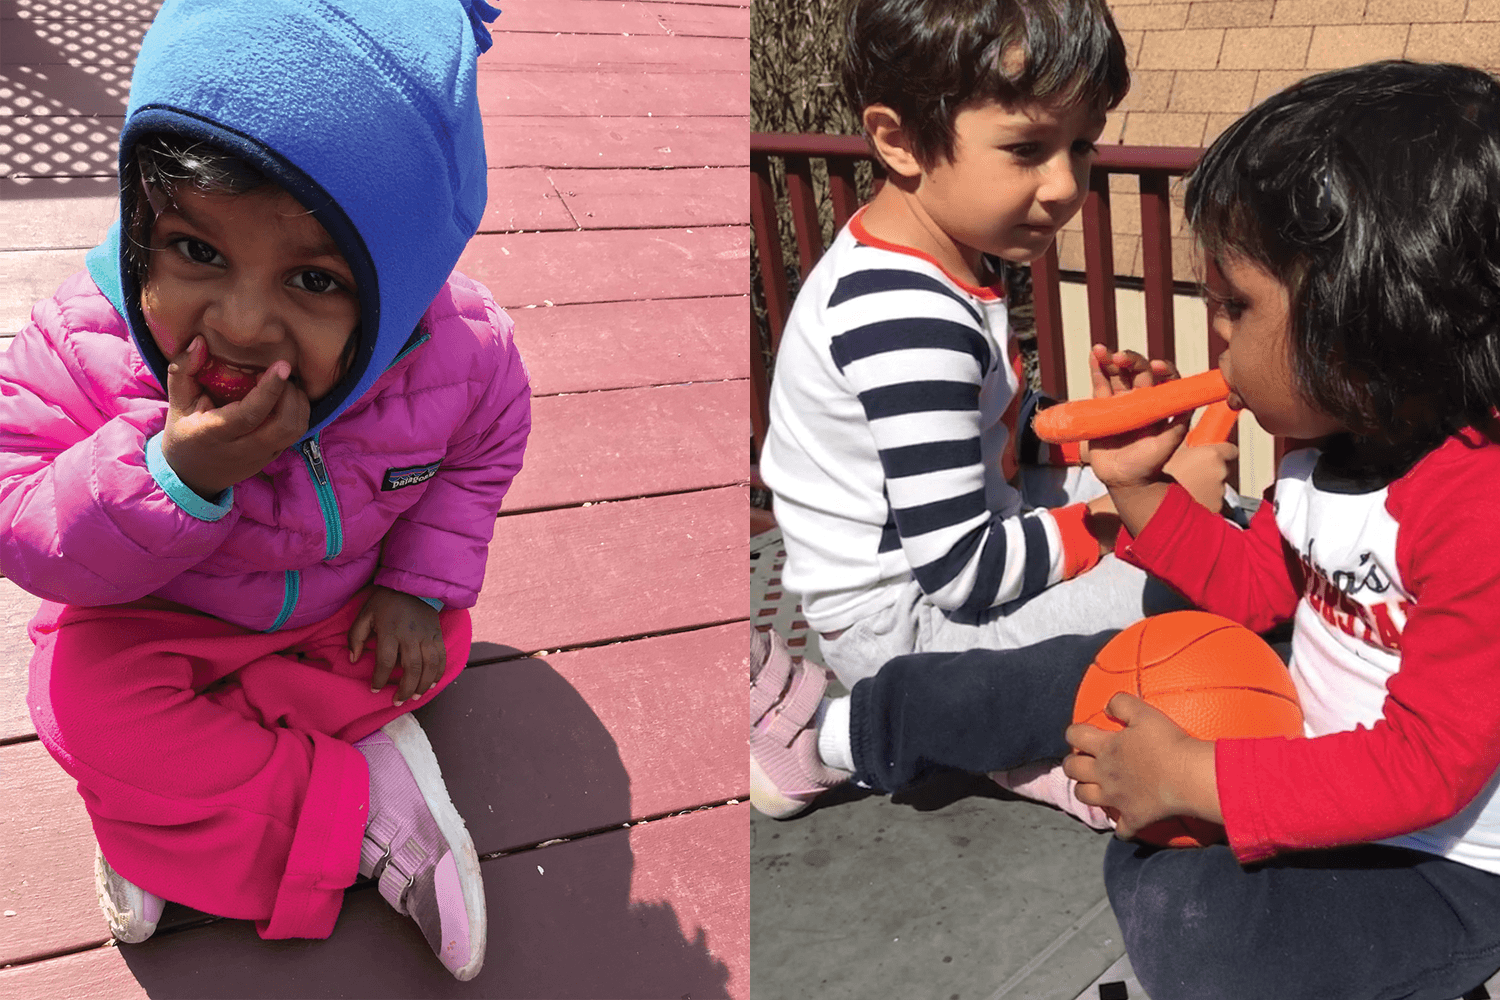 Ambika Samarthya-Howard's daughter trying strawberries and carrots for the first time in quarantine May 2020